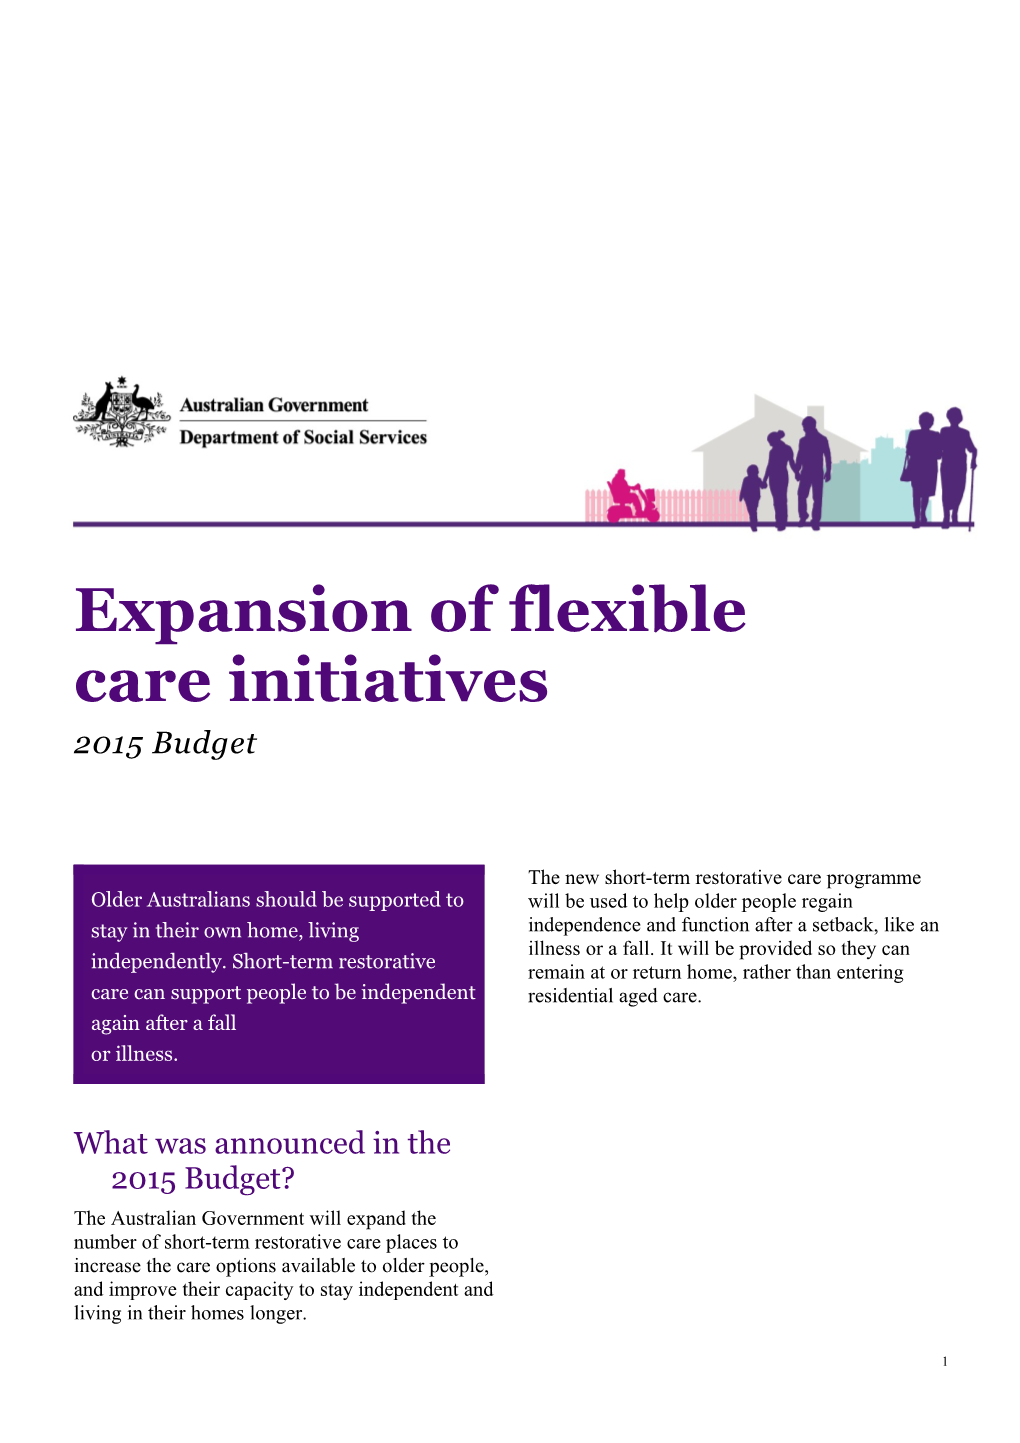 Expansion of Flexible Care Initiatives